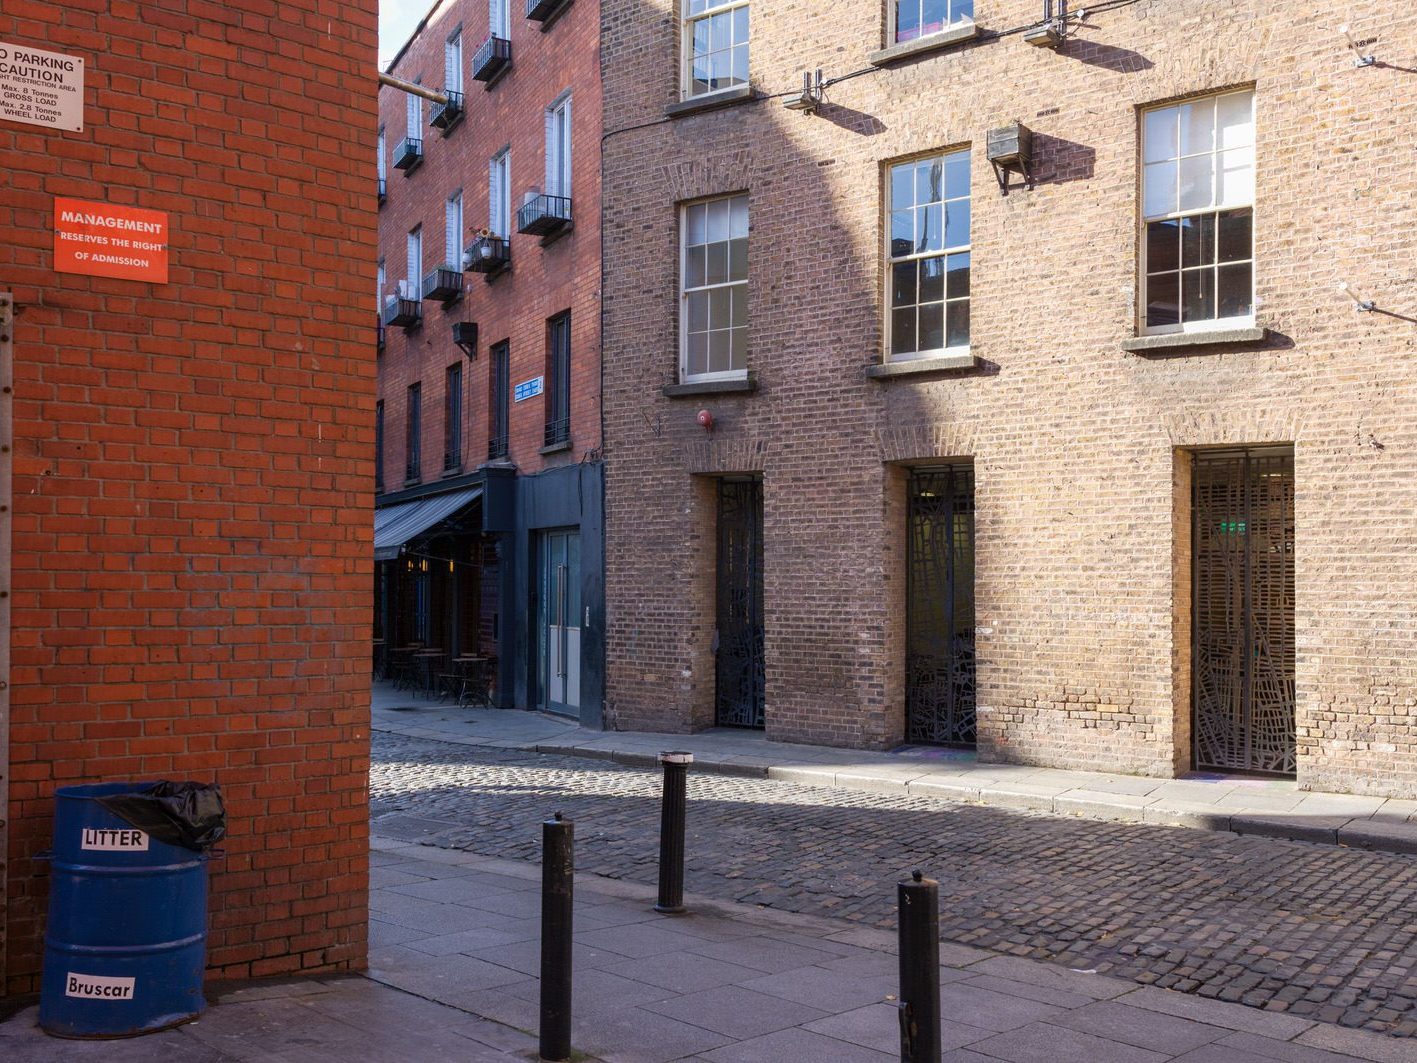 ESSEX STREET AND NEARBY AND THE ELEPHANT STORY [TEMPLE BAR AREA OF DUBLIN] 011